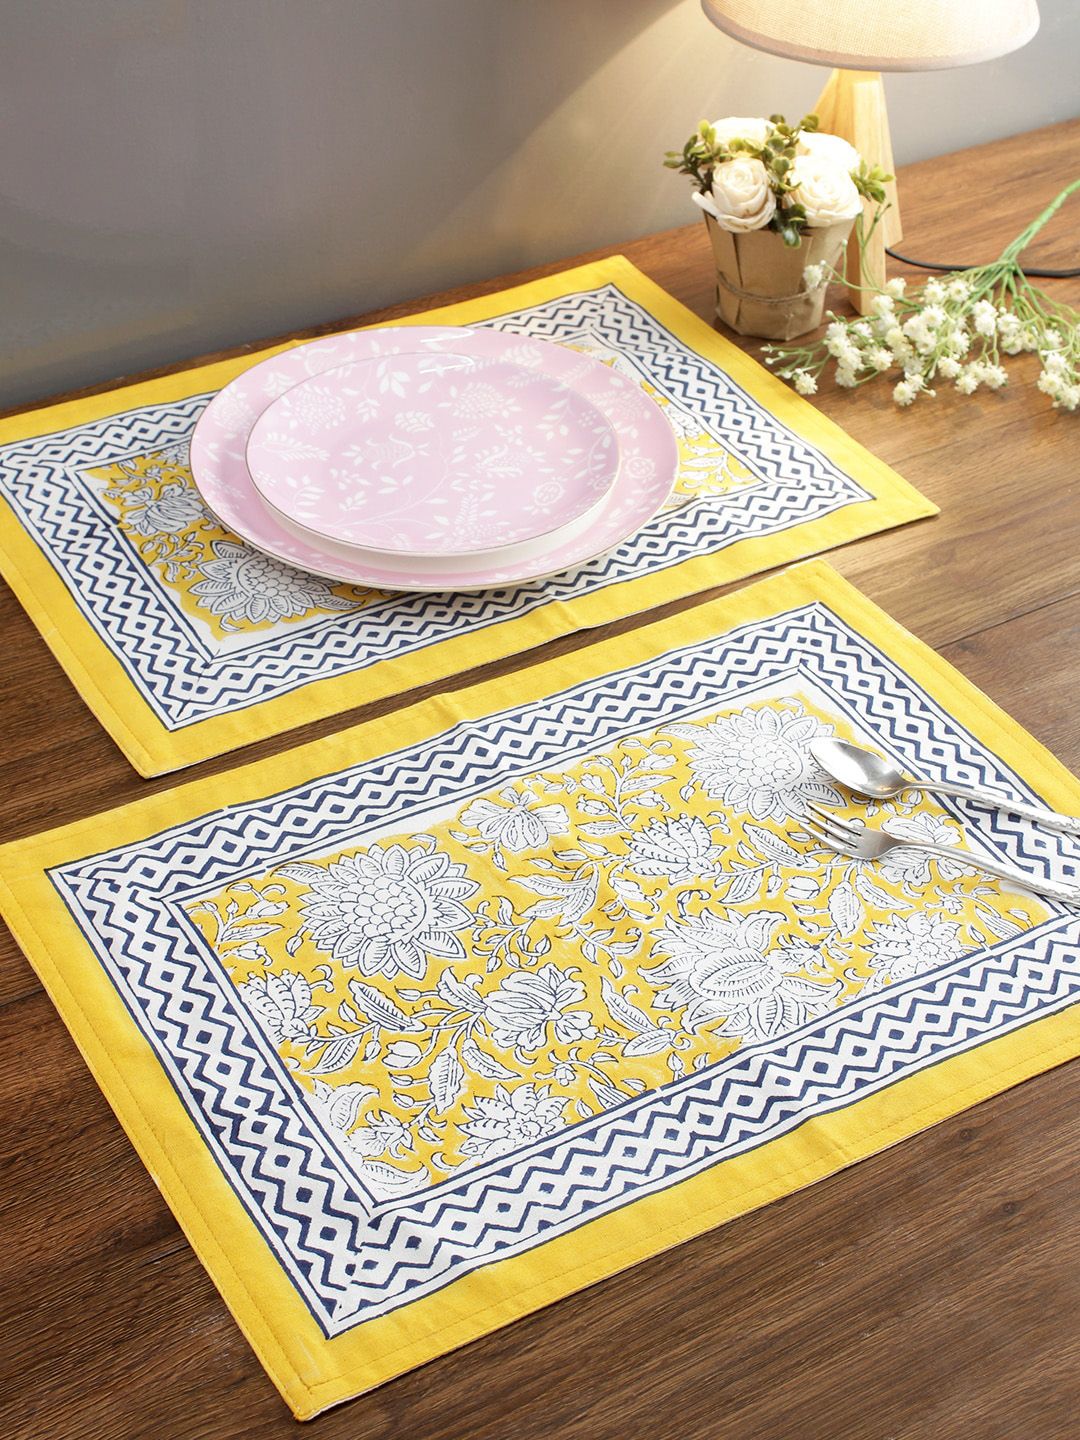 Rajasthan Decor Set Of 6 Yellow & White Printed Table Placemats Price in India